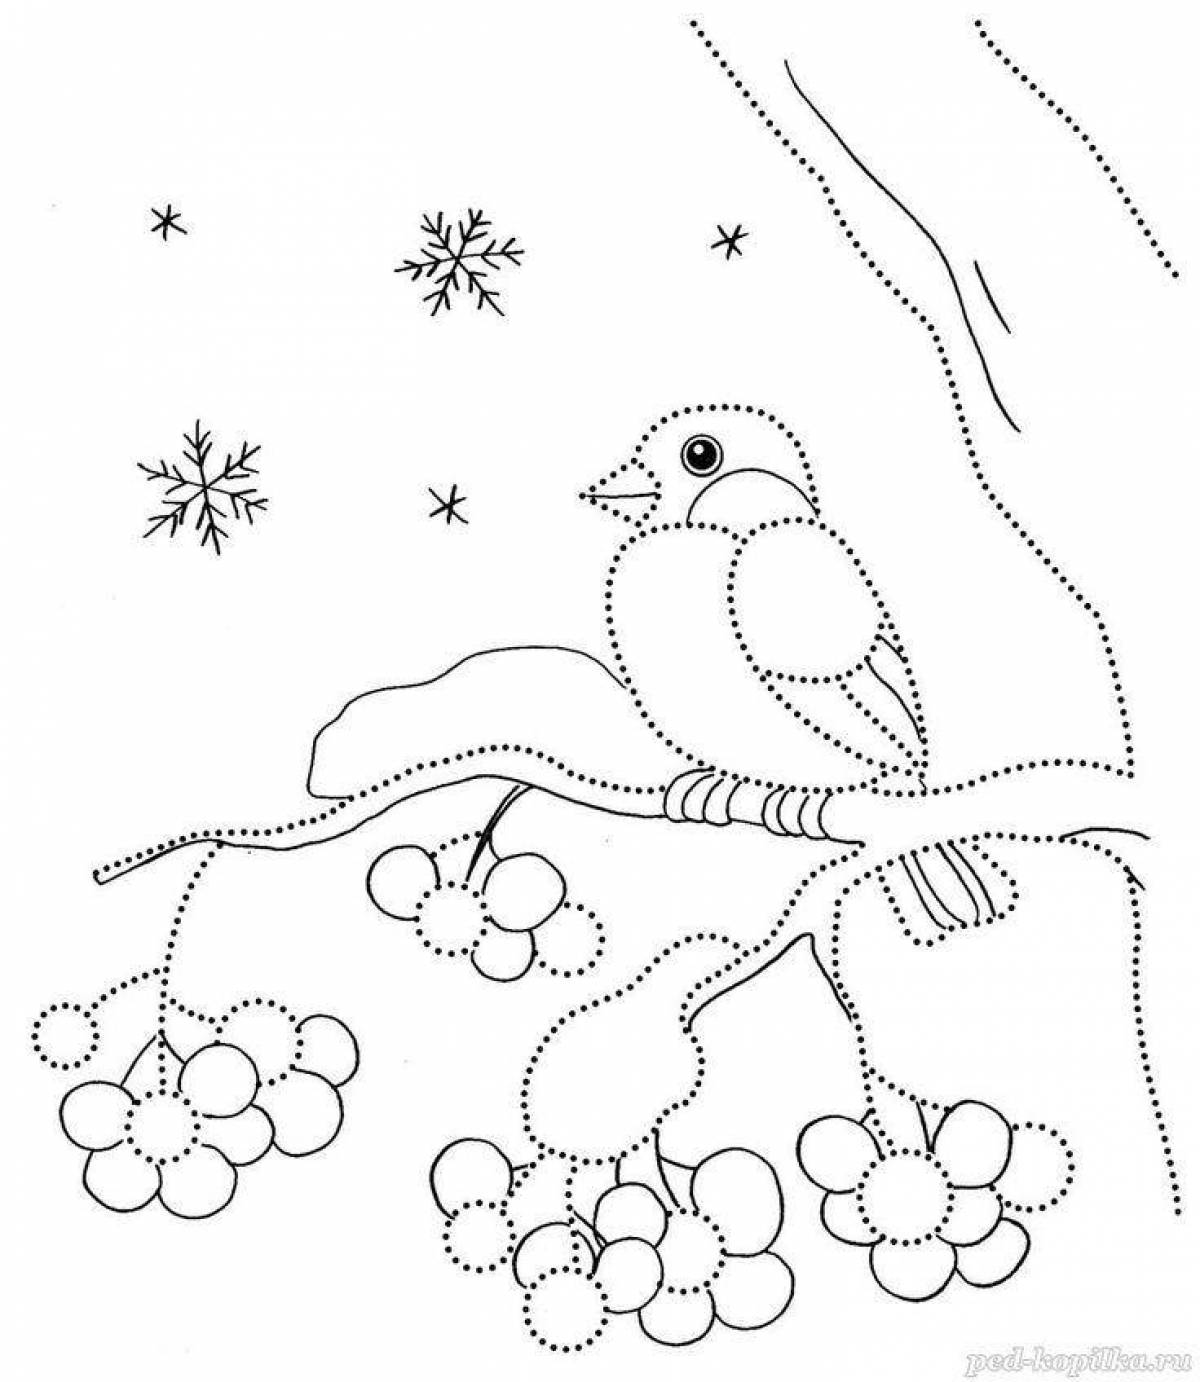 Fabulous coloring pages of wintering birds for 3-4 year olds